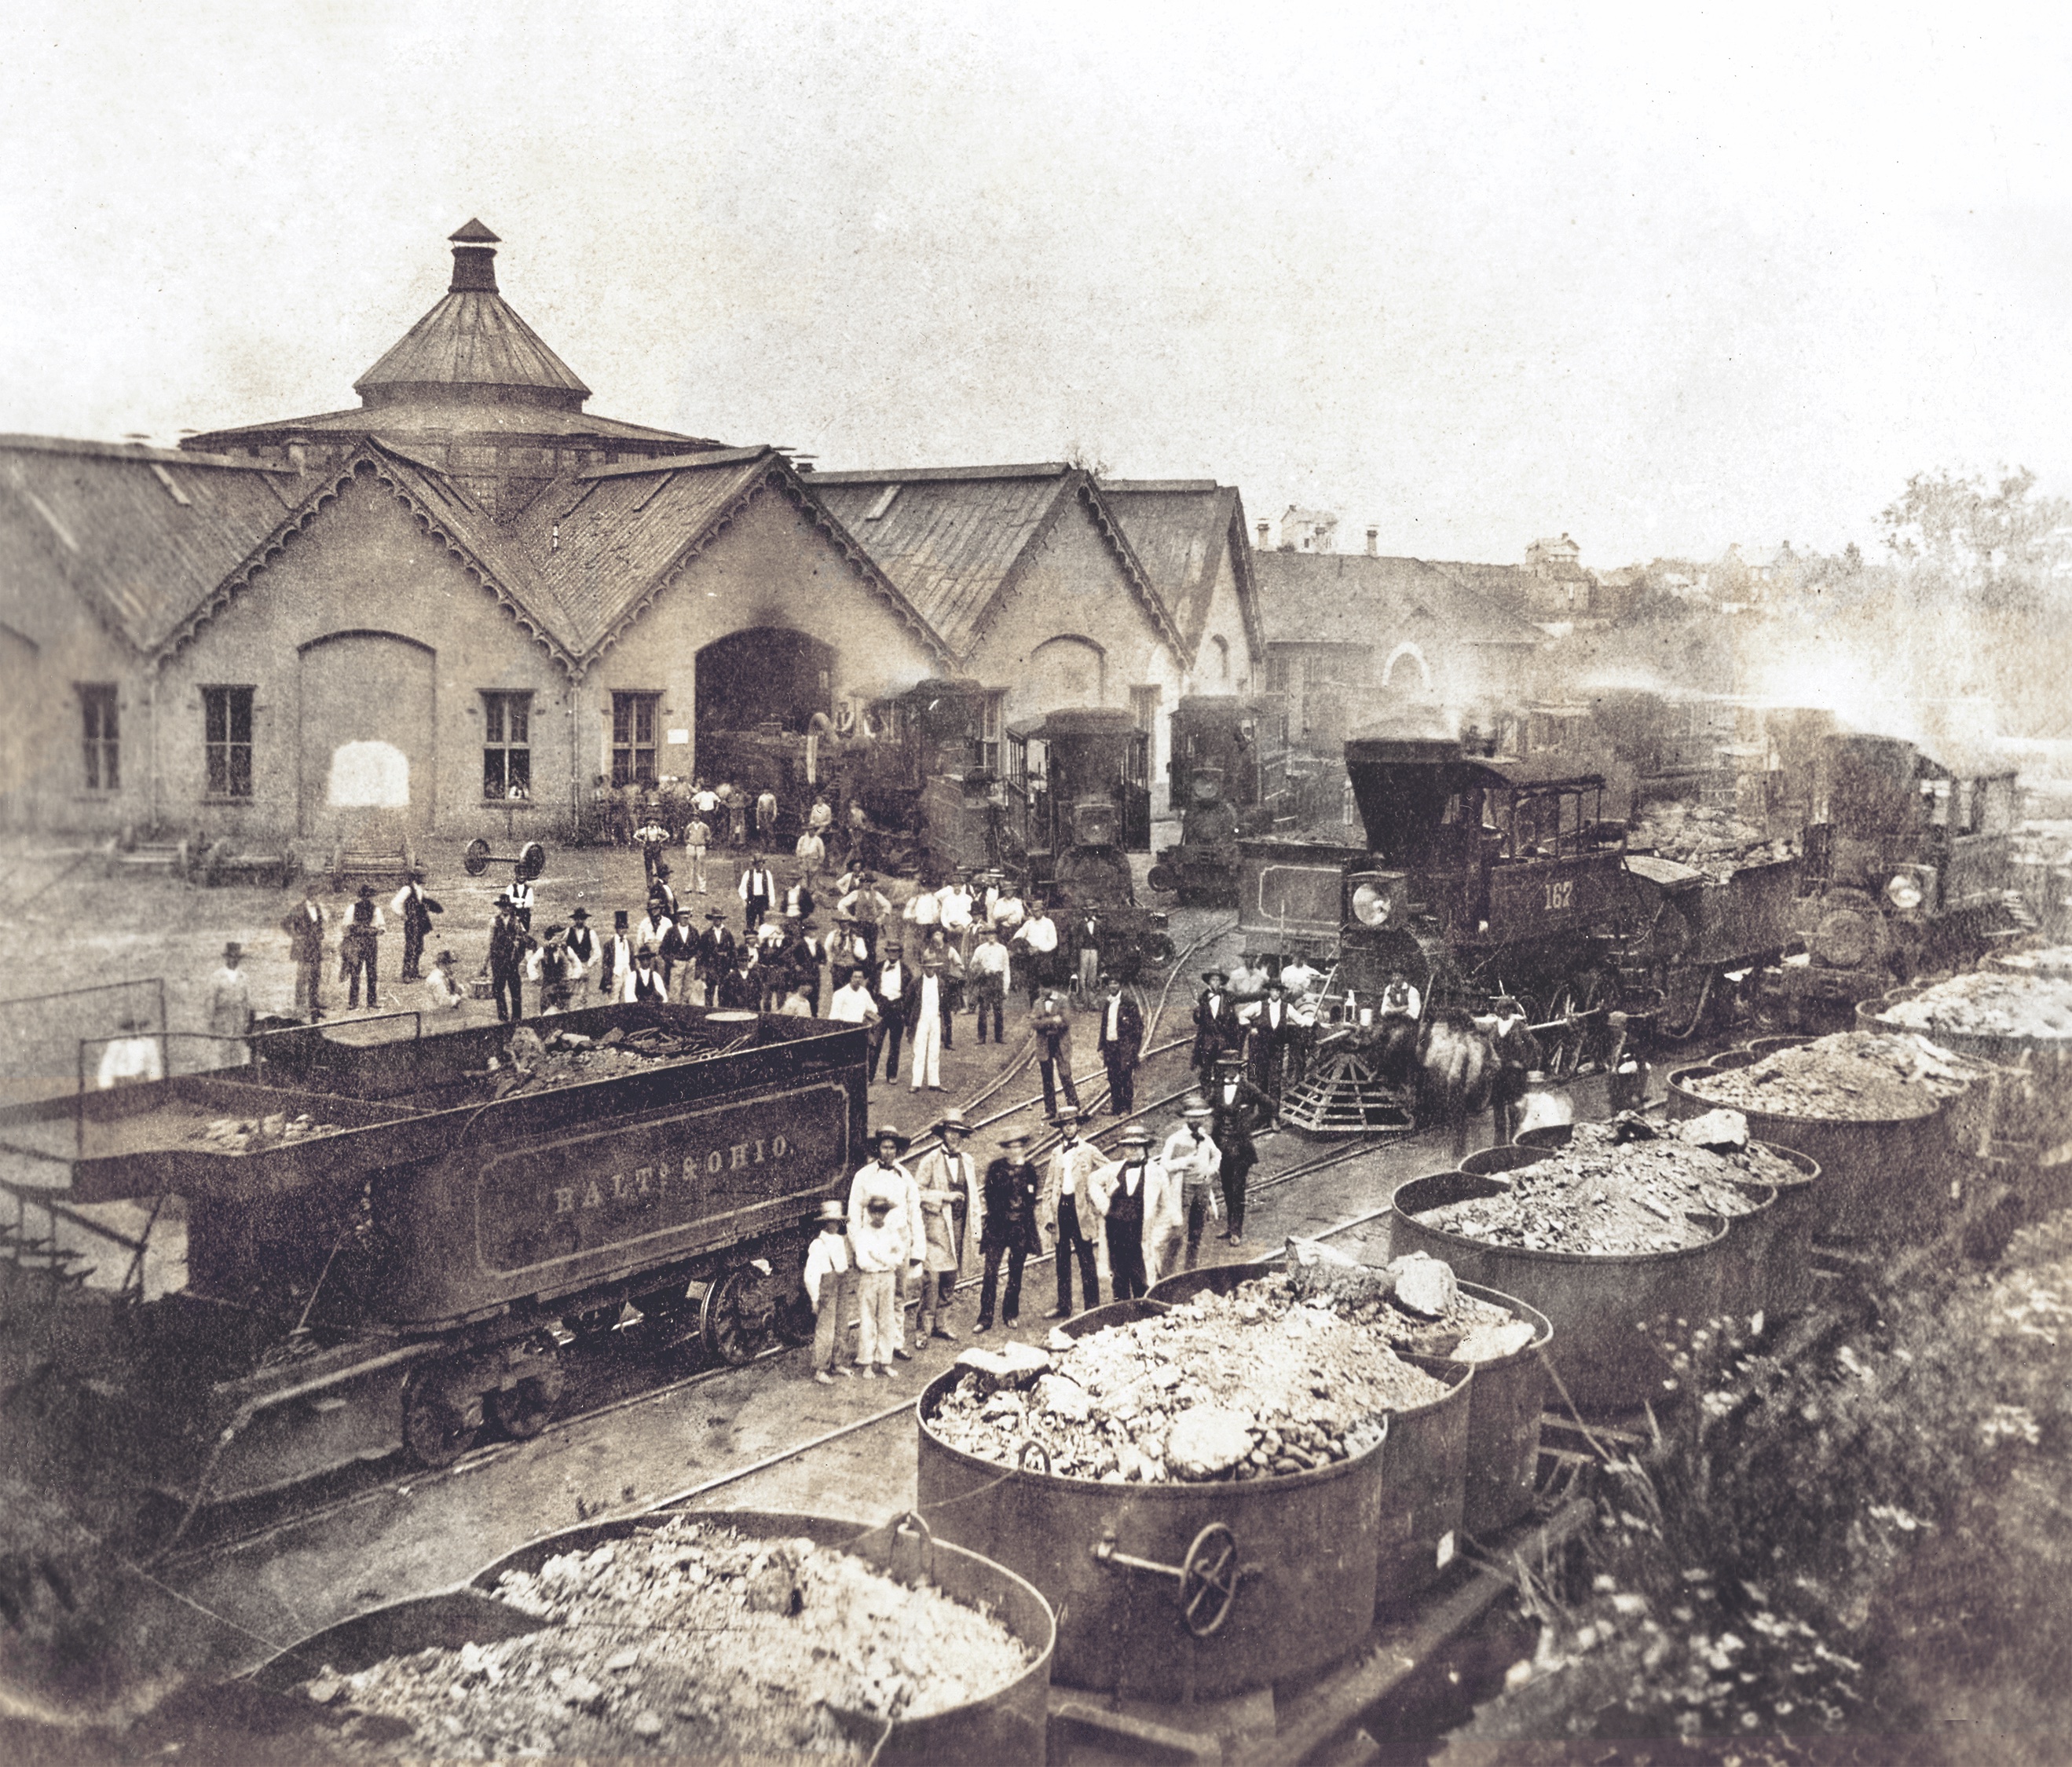 In this 1863 photograph of the B&O Railroad’s Martinsburg roundhouse, taken the year West Virginia became the country’s 35th state, workmen and bystanders pose among an assortment of Camelback locomotives and a train of iron-pot coal cars. (Photoquest/Getty Images)